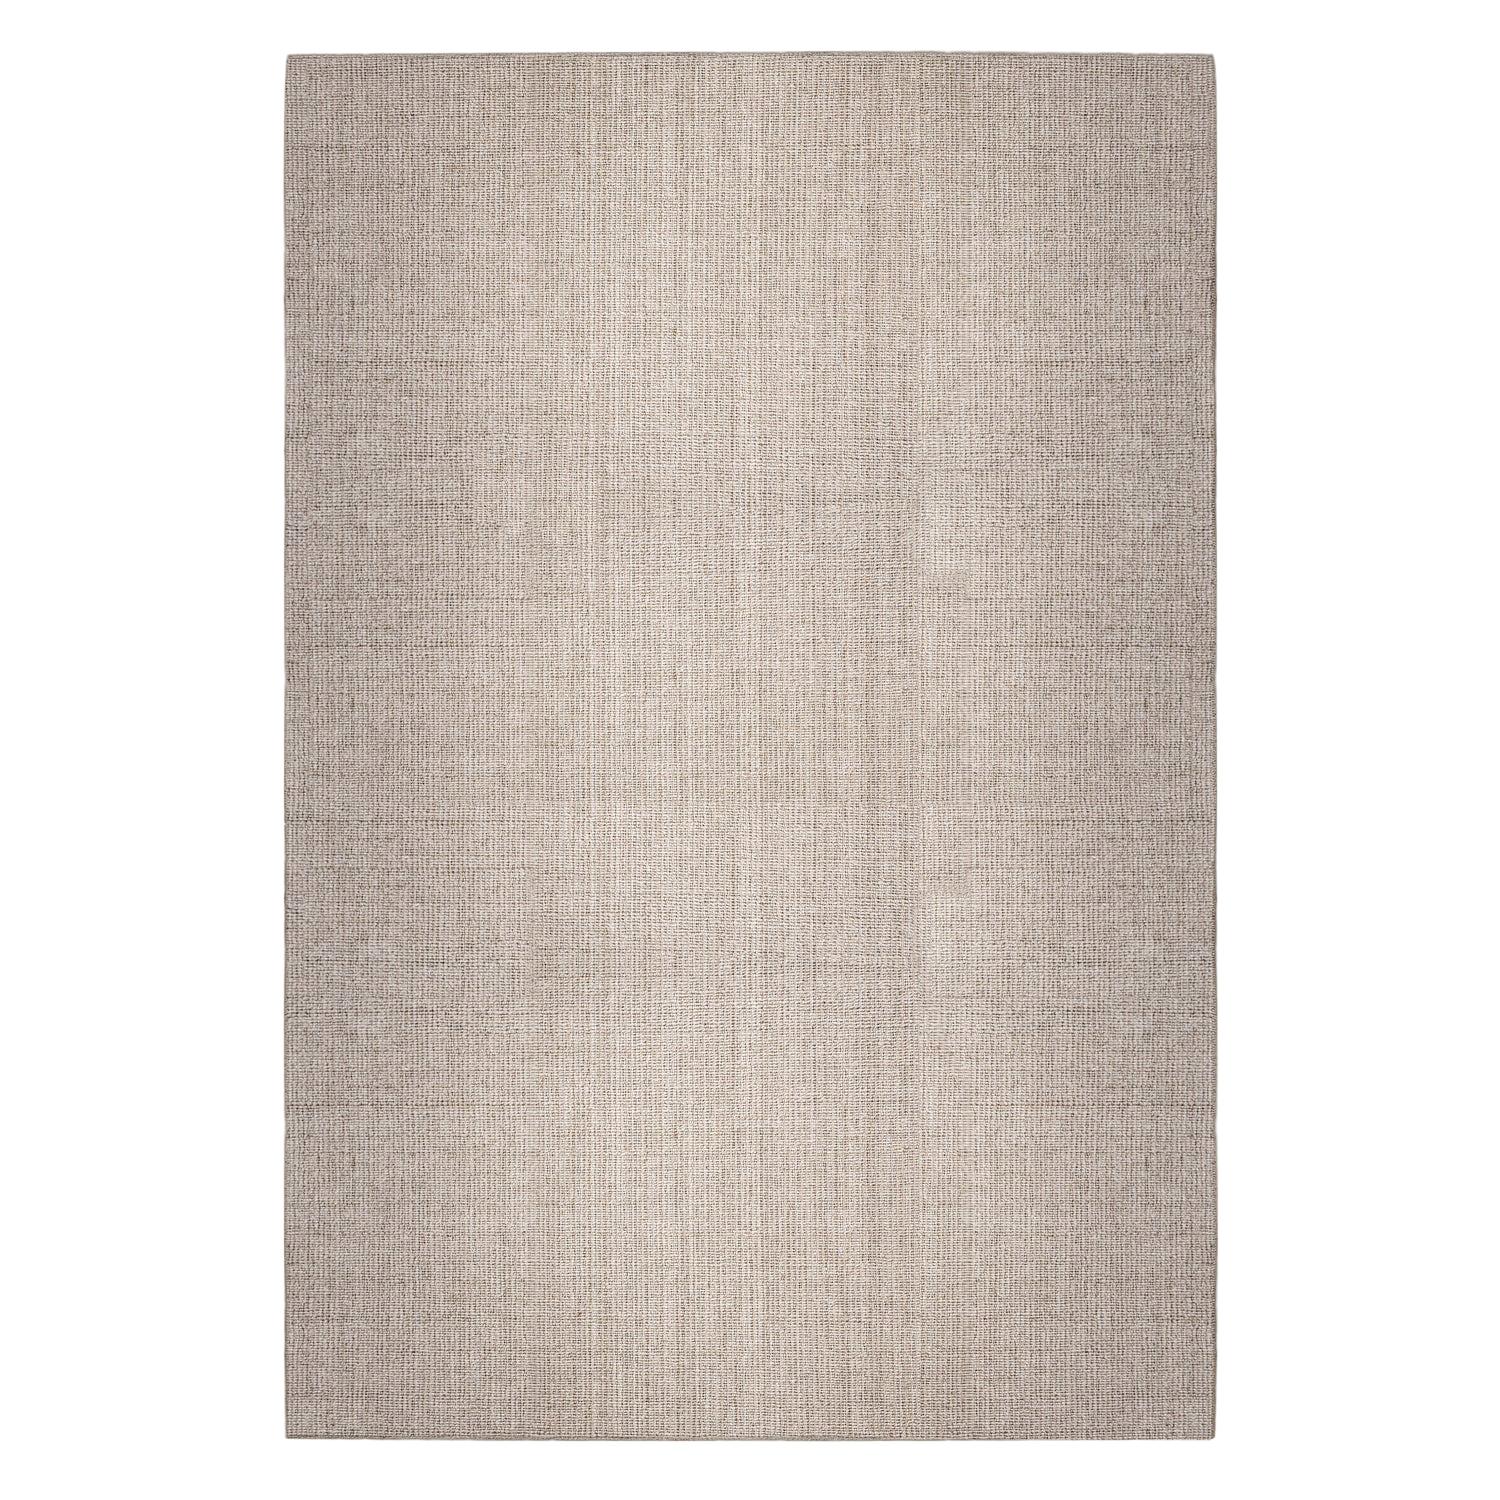 Modern Outdoor Indoor Natural Coconut Rug by Deanna Comellini In Stock 200x300cm For Sale